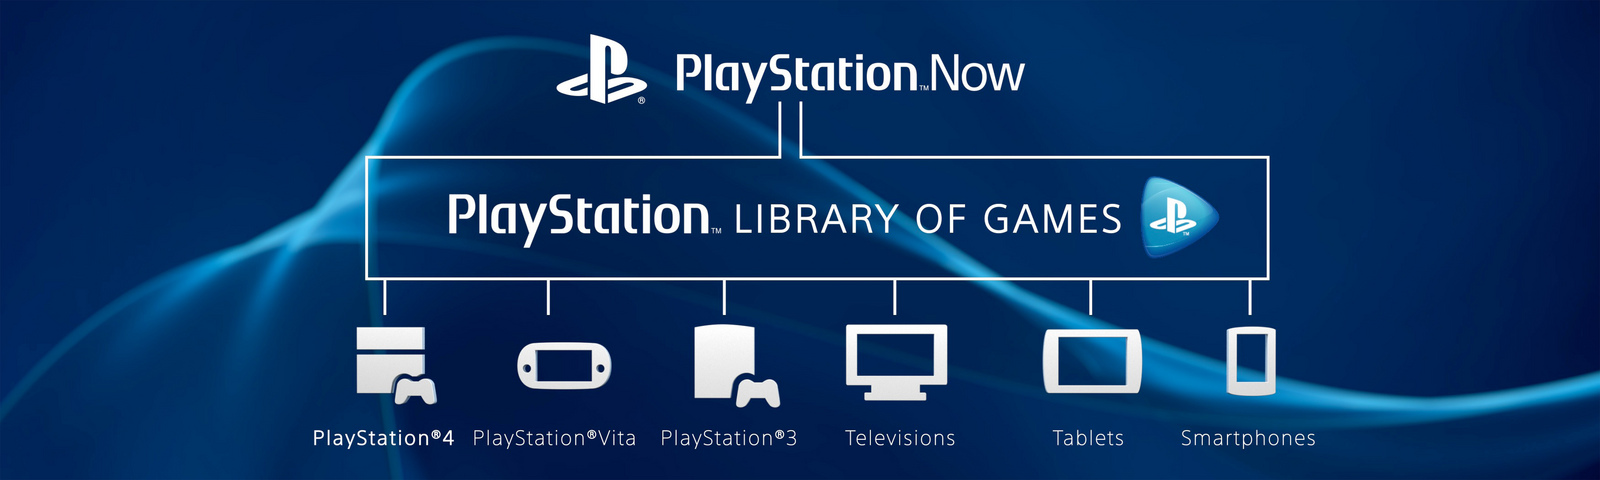 PlayStation Now Private Beta for the PS4 Starts Tomorrow - Get Ready to Stream Some Games